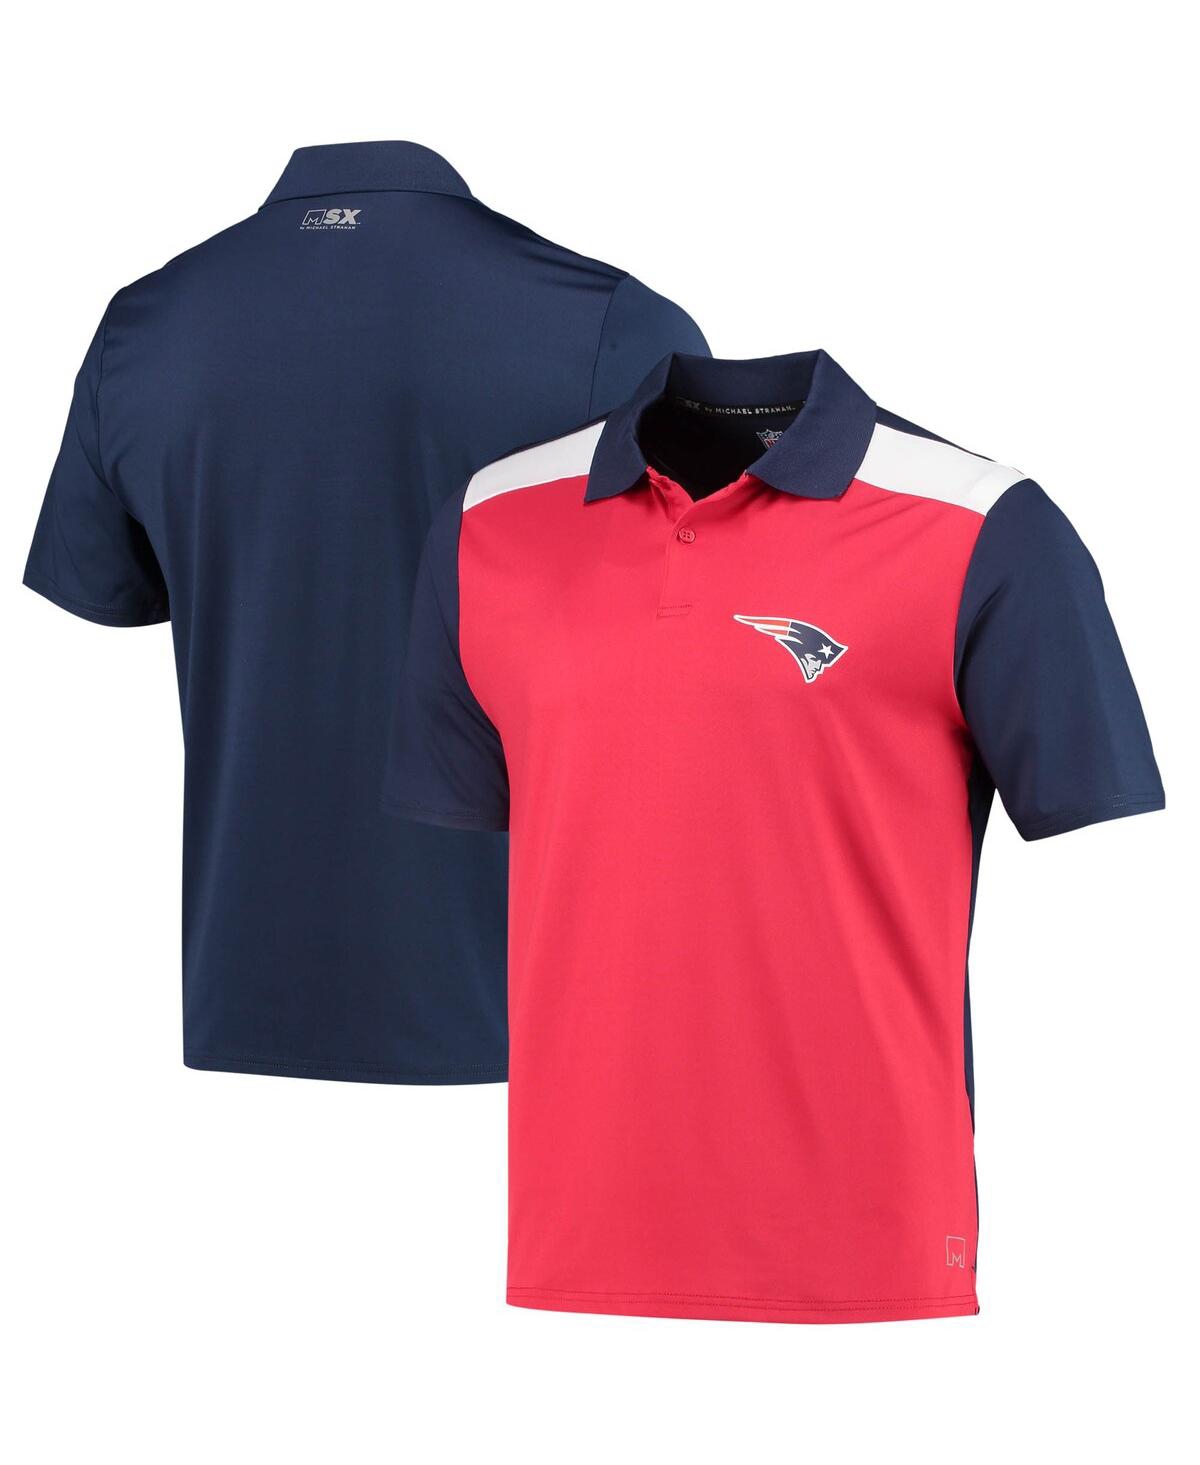 Men's Msx by Michael Strahan Red, Navy New England Patriots Challenge Color Block Performance Polo Shirt - Red, Navy